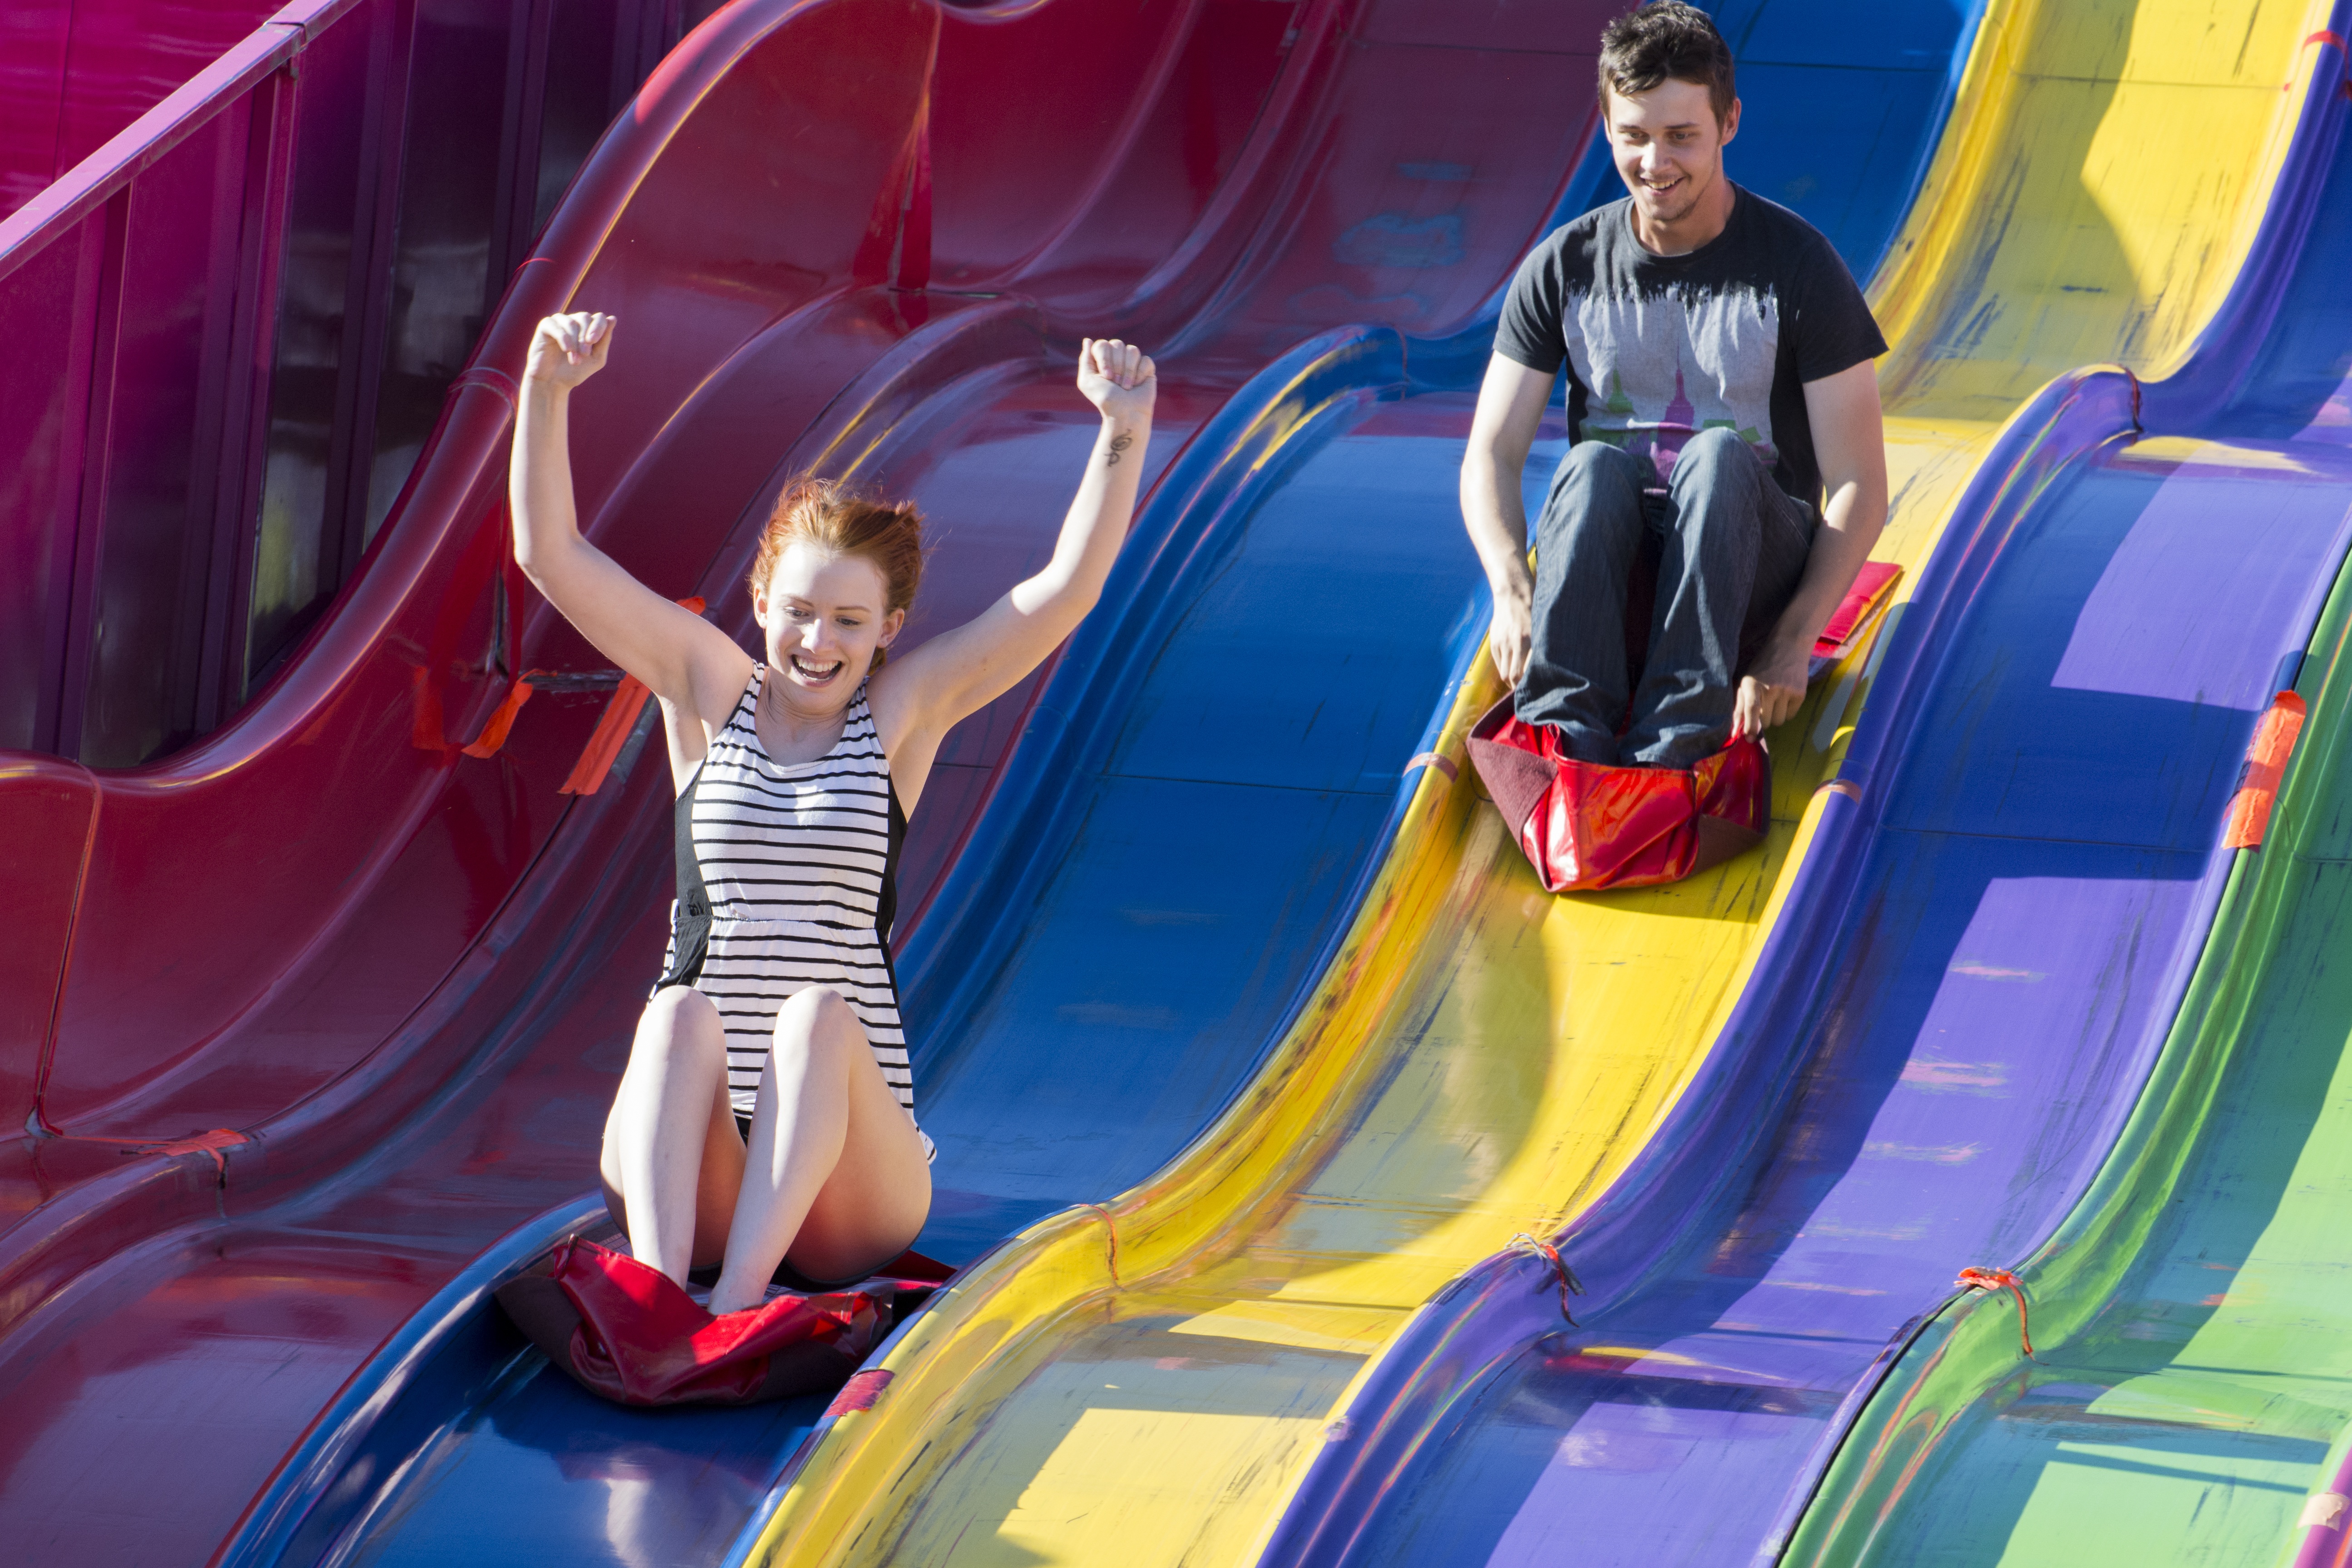 BIG RACE – Emily Holmes races ahead of Matt Bailey on one of the big slides during Westerner Days.